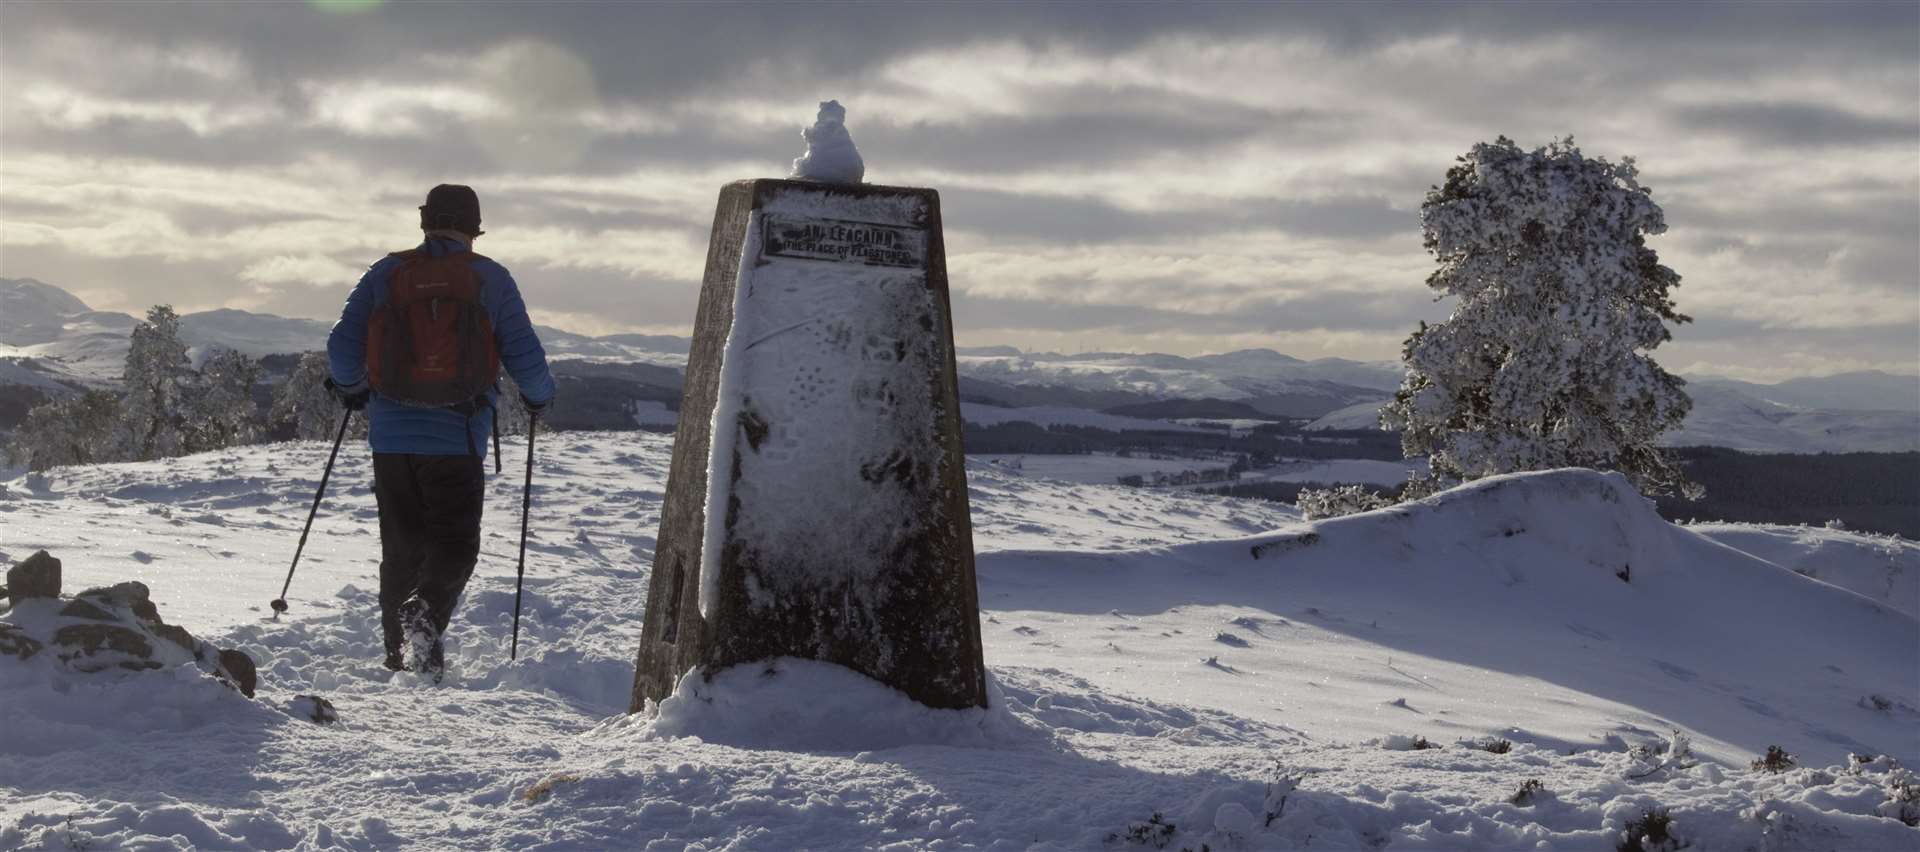 Snow scenes on the hills above Inverness on Sunday. Picture: Philip Murray.